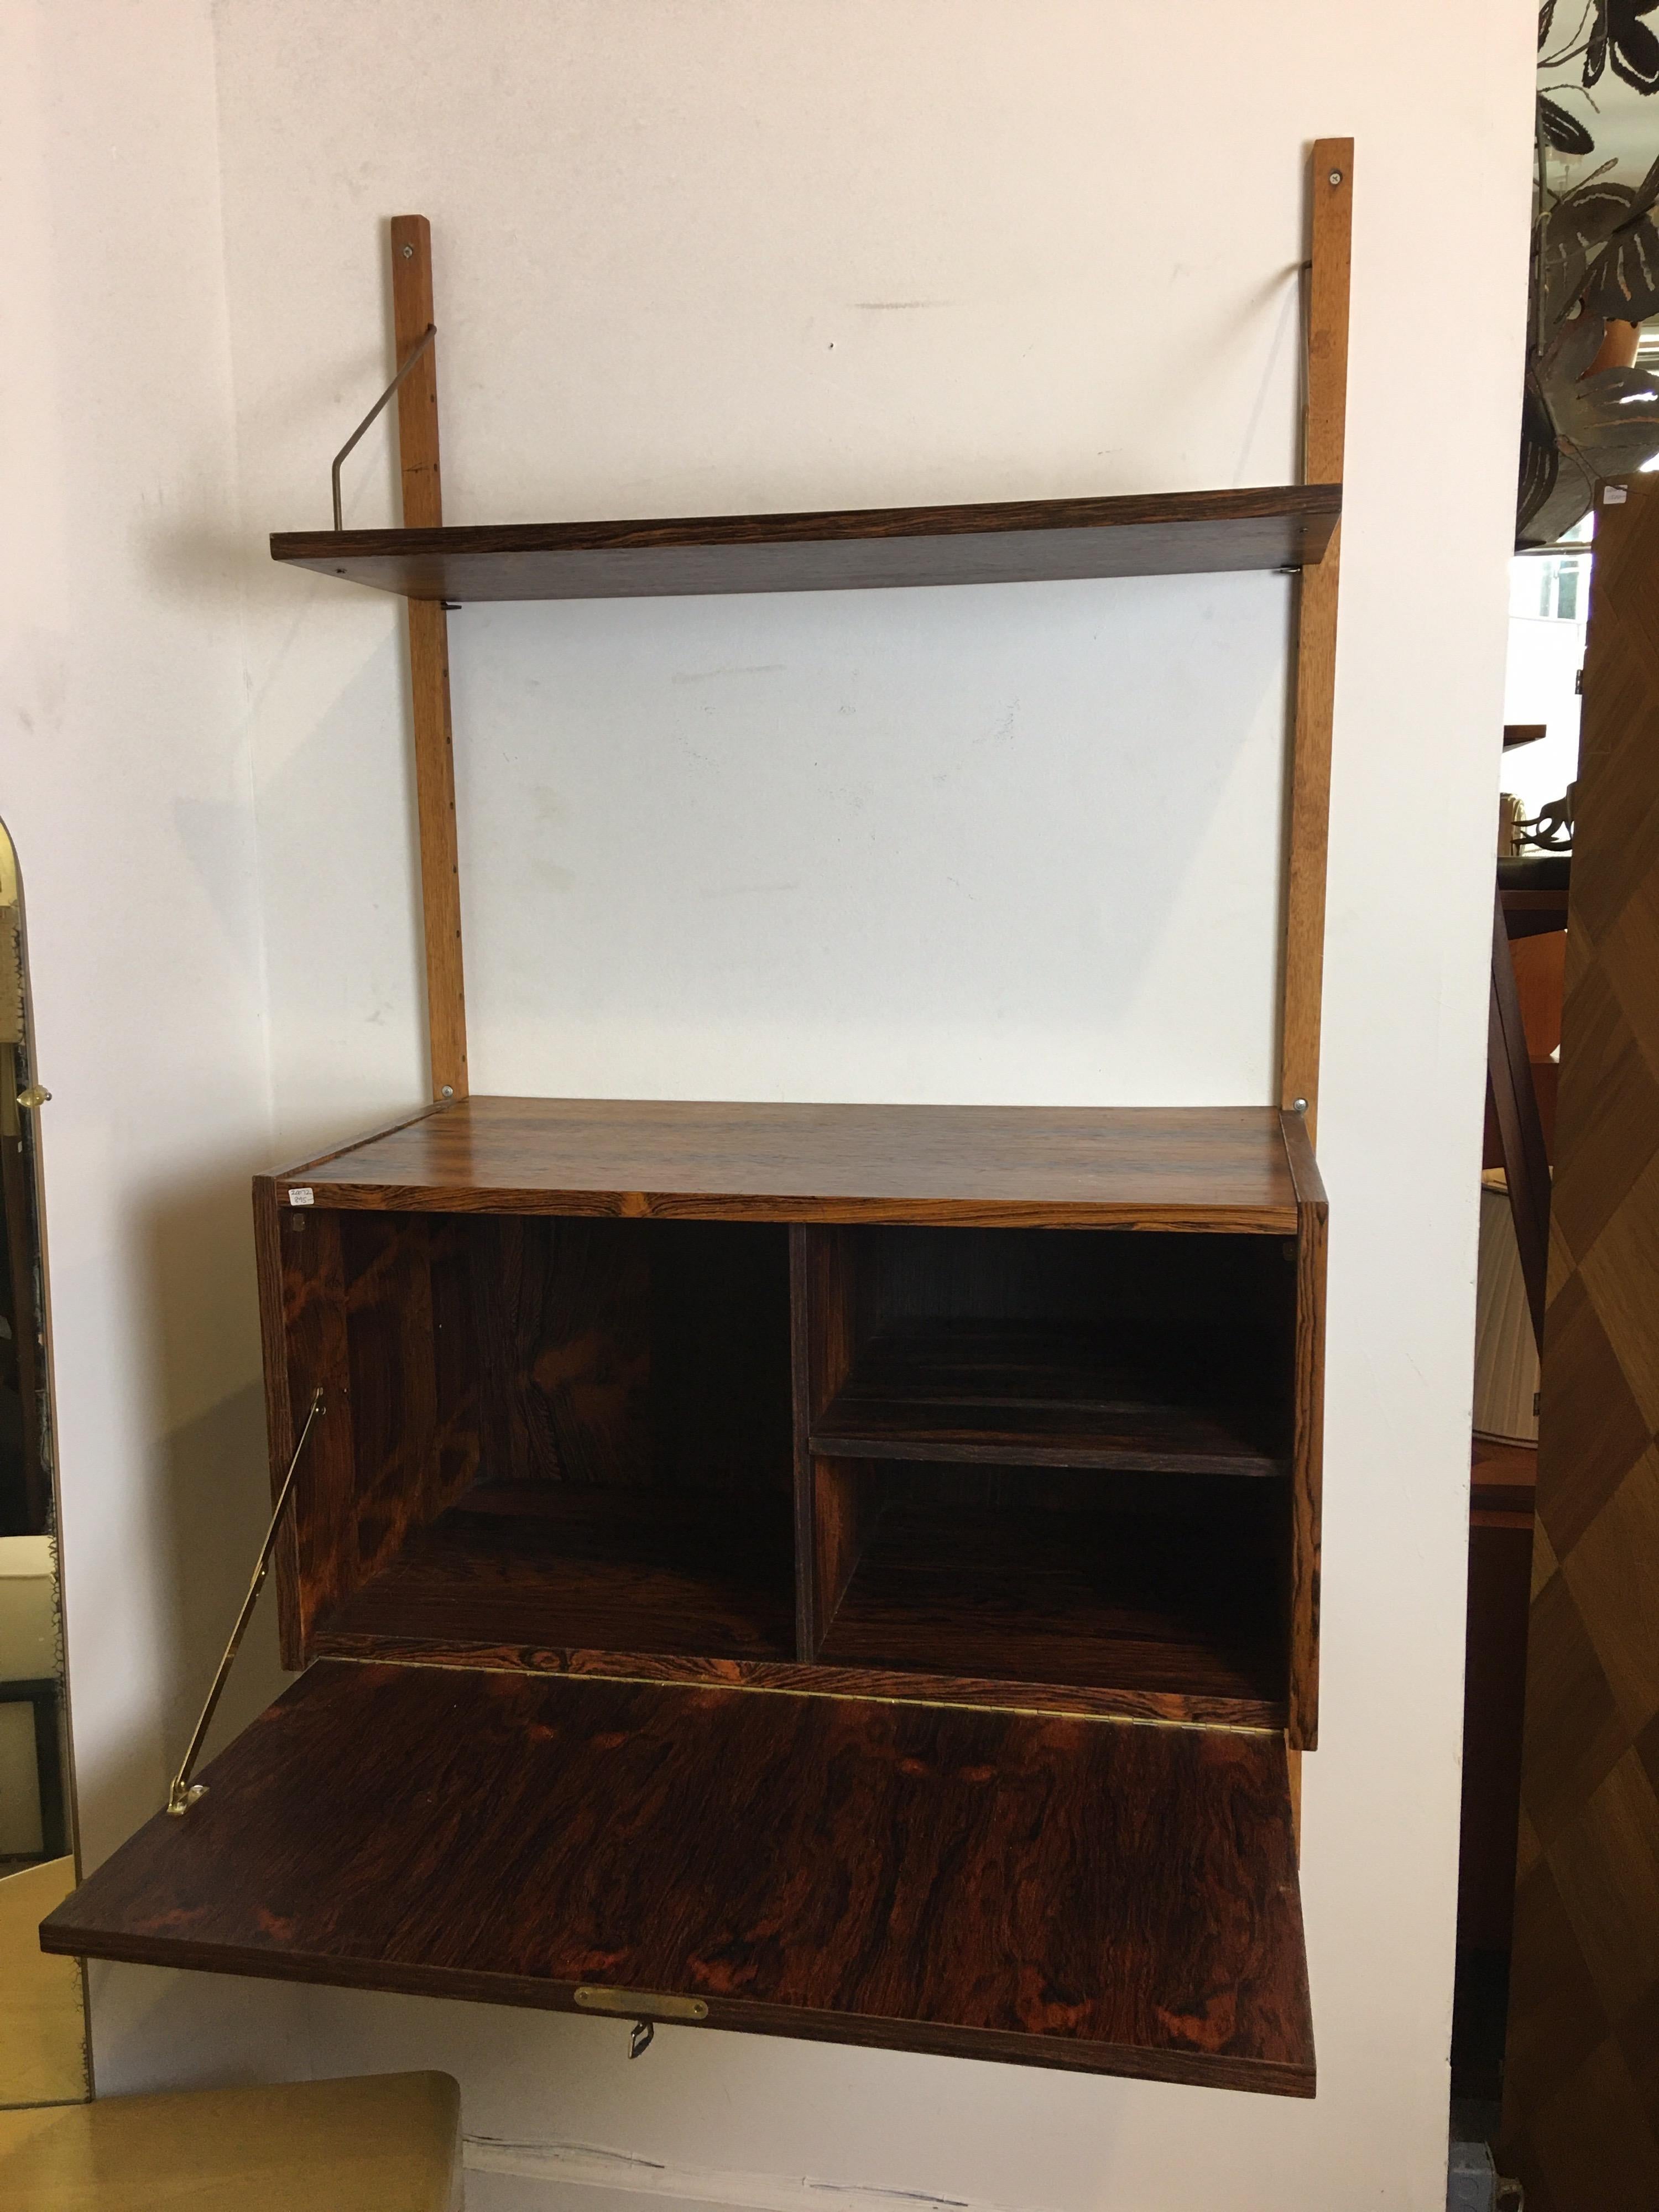 Very useful hanging rosewood wall unit, one bay wide. Adjustable cabinet and shelf. Perfect to use as a bar or entry piece! Rosewood is very clean, unit has 1 key, 2 wall brackets, 1 drop-front cabinet and 1 shelf. Cabinet is 15.5 deep, 31.5 wide